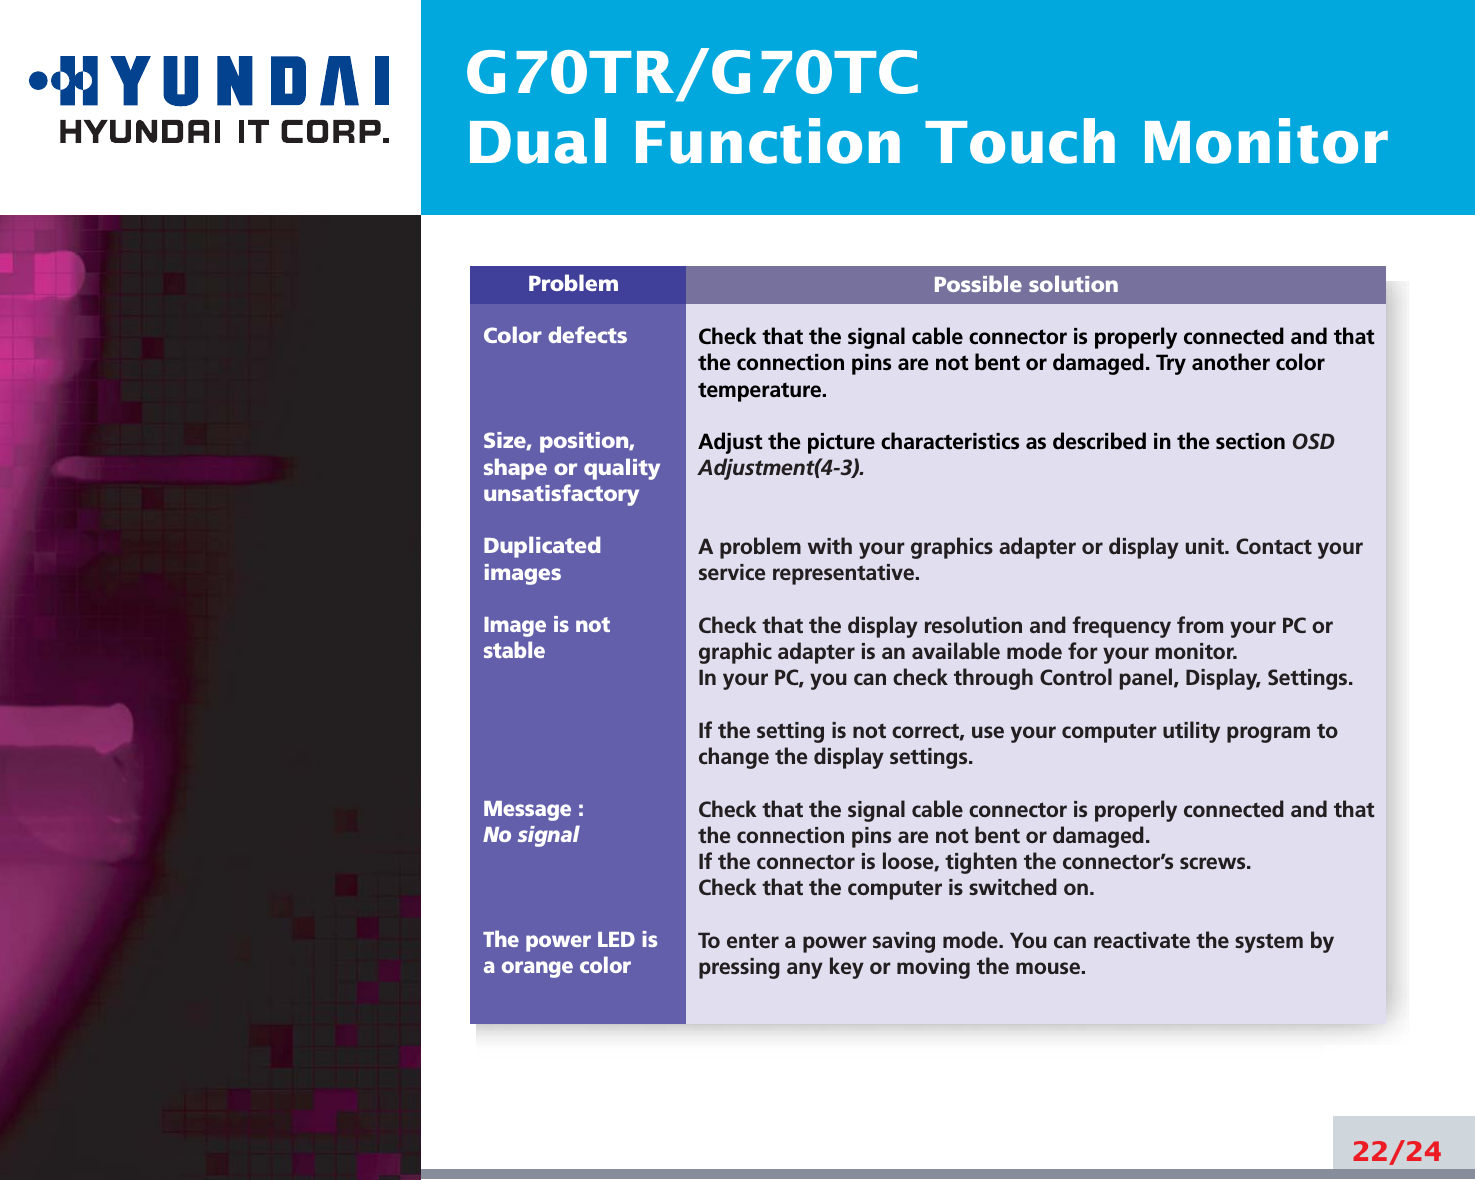 G70TR/G70TCDual Function Touch Monitor22/24Possible solutionCheck that the signal cable connector is properly connected and thatthe connection pins are not bent or damaged. Try another colortemperature. Adjust the picture characteristics as described in the section OSDAdjustment(4-3).A problem with your graphics adapter or display unit. Contact yourservice representative.Check that the display resolution and frequency from your PC orgraphic adapter is an available mode for your monitor.In your PC, you can check through Control panel, Display, Settings.If the setting is not correct, use your computer utility program tochange the display settings.Check that the signal cable connector is properly connected and thatthe connection pins are not bent or damaged.If the connector is loose, tighten the connector’s screws.Check that the computer is switched on.To enter a power saving mode. You can reactivate the system bypressing any key or moving the mouse.ProblemColor defectsSize, position,shape or qualityunsatisfactoryDuplicatedimagesImage is notstableMessage : No signalThe power LED isa orange color